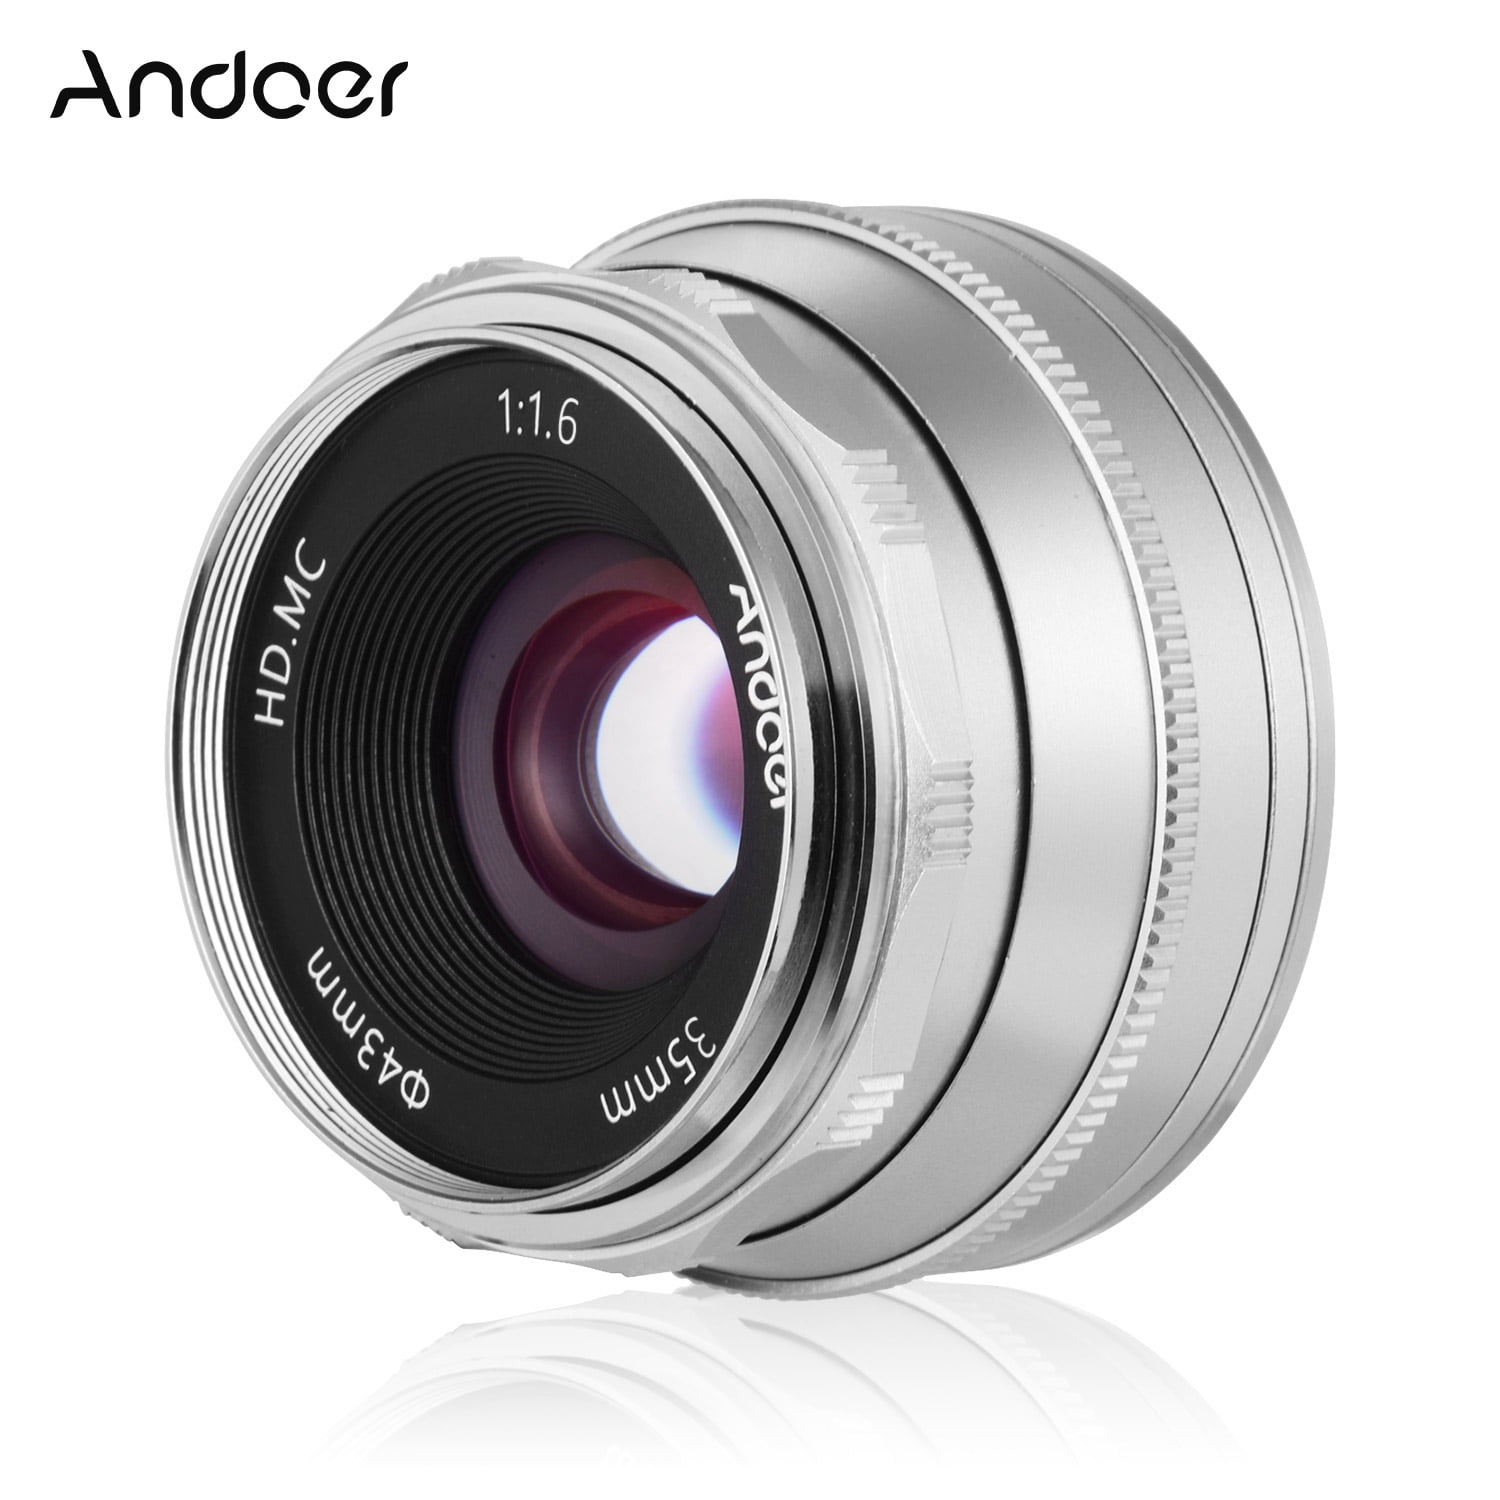 7artisans 35mm F1.4 APS-C Camera Lens Large Aperture Manual Focus Sony e Mount Lens for sonya6000 a6400、a6100、a6600、a5100、a6500、a6300 